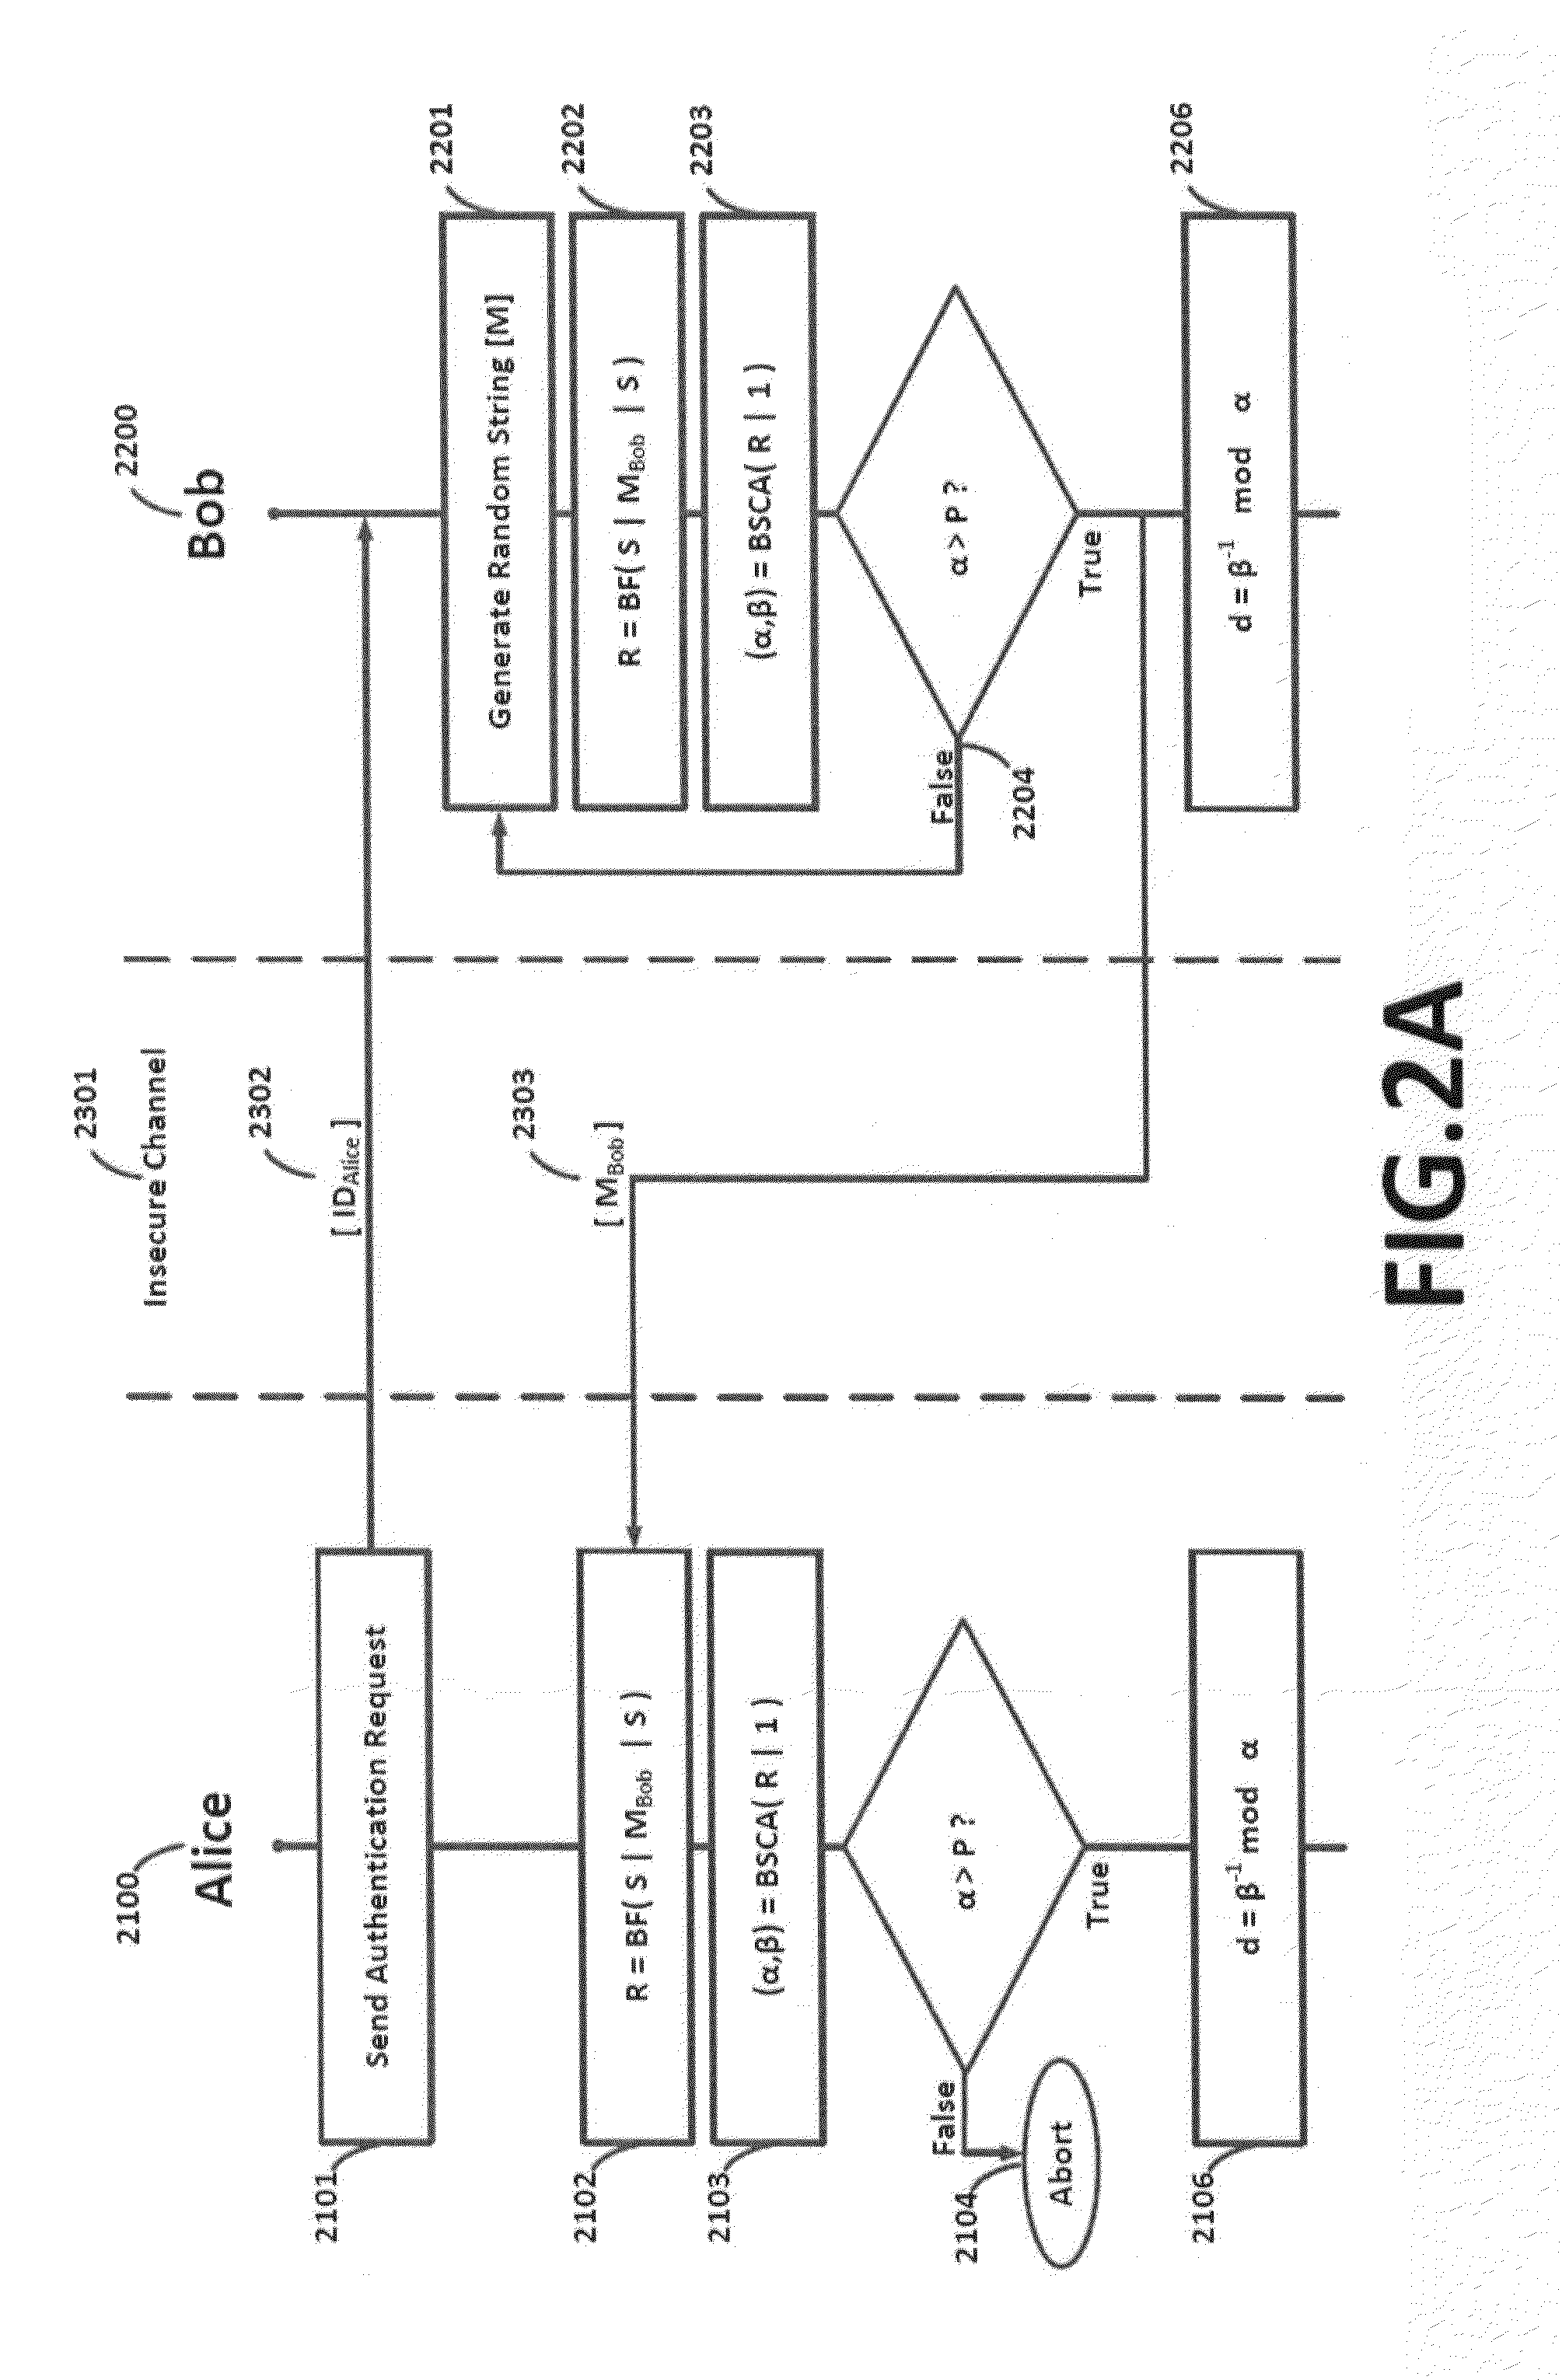 Cryptographic method and system for secure authentication and key exchange